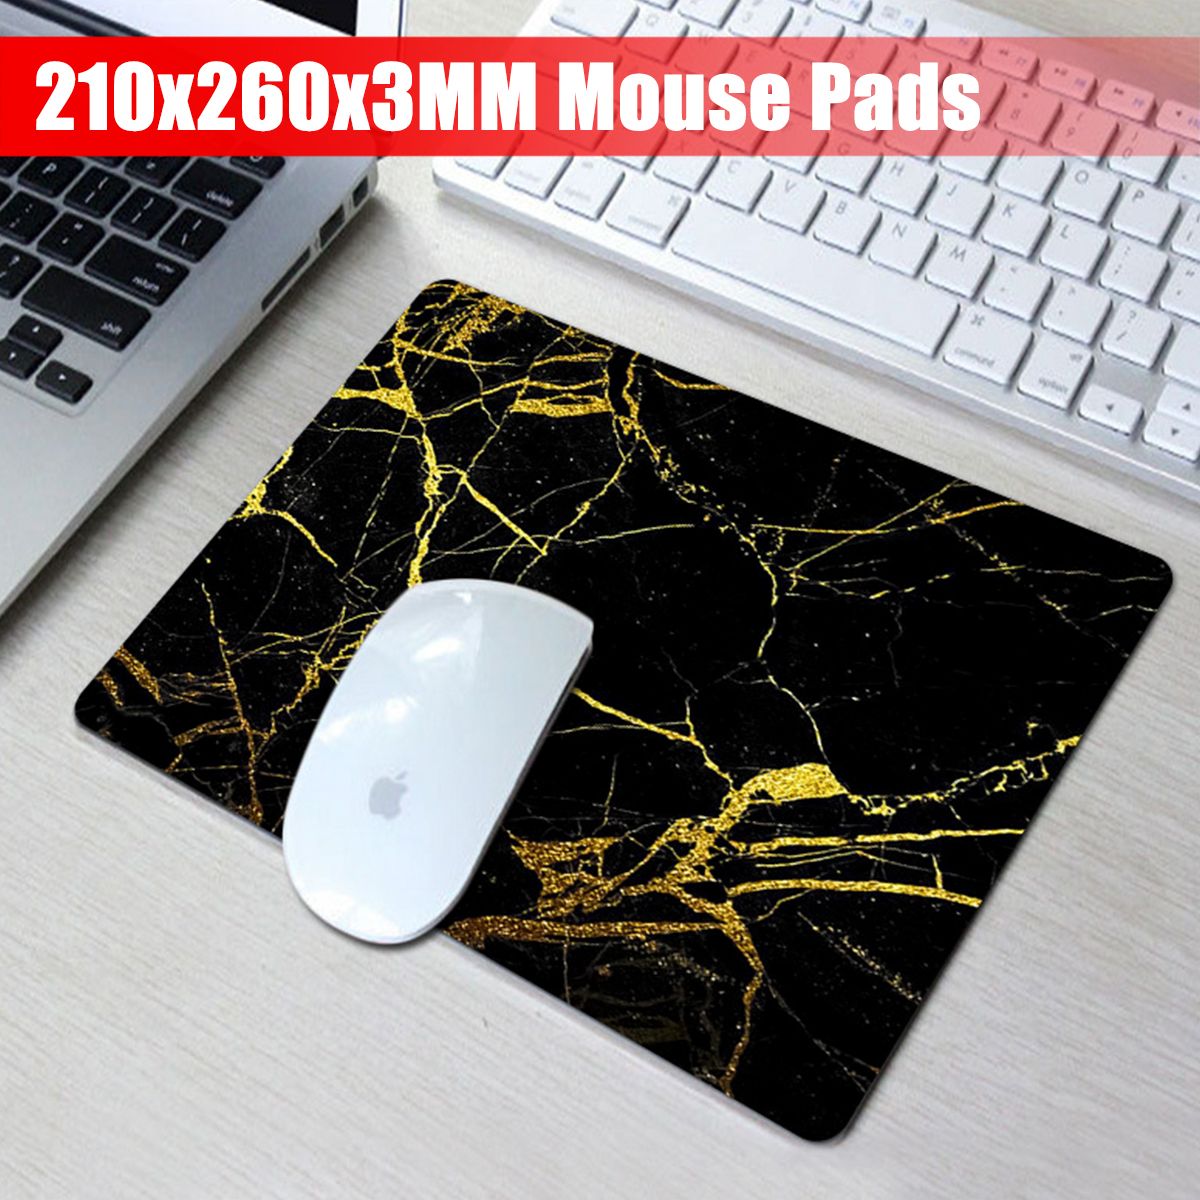 Marble-Pattern-Mouse-Pads-210x260x3mm-Anti-slip-Rubber-Black-Gaming-Mouse-Mat-1750041